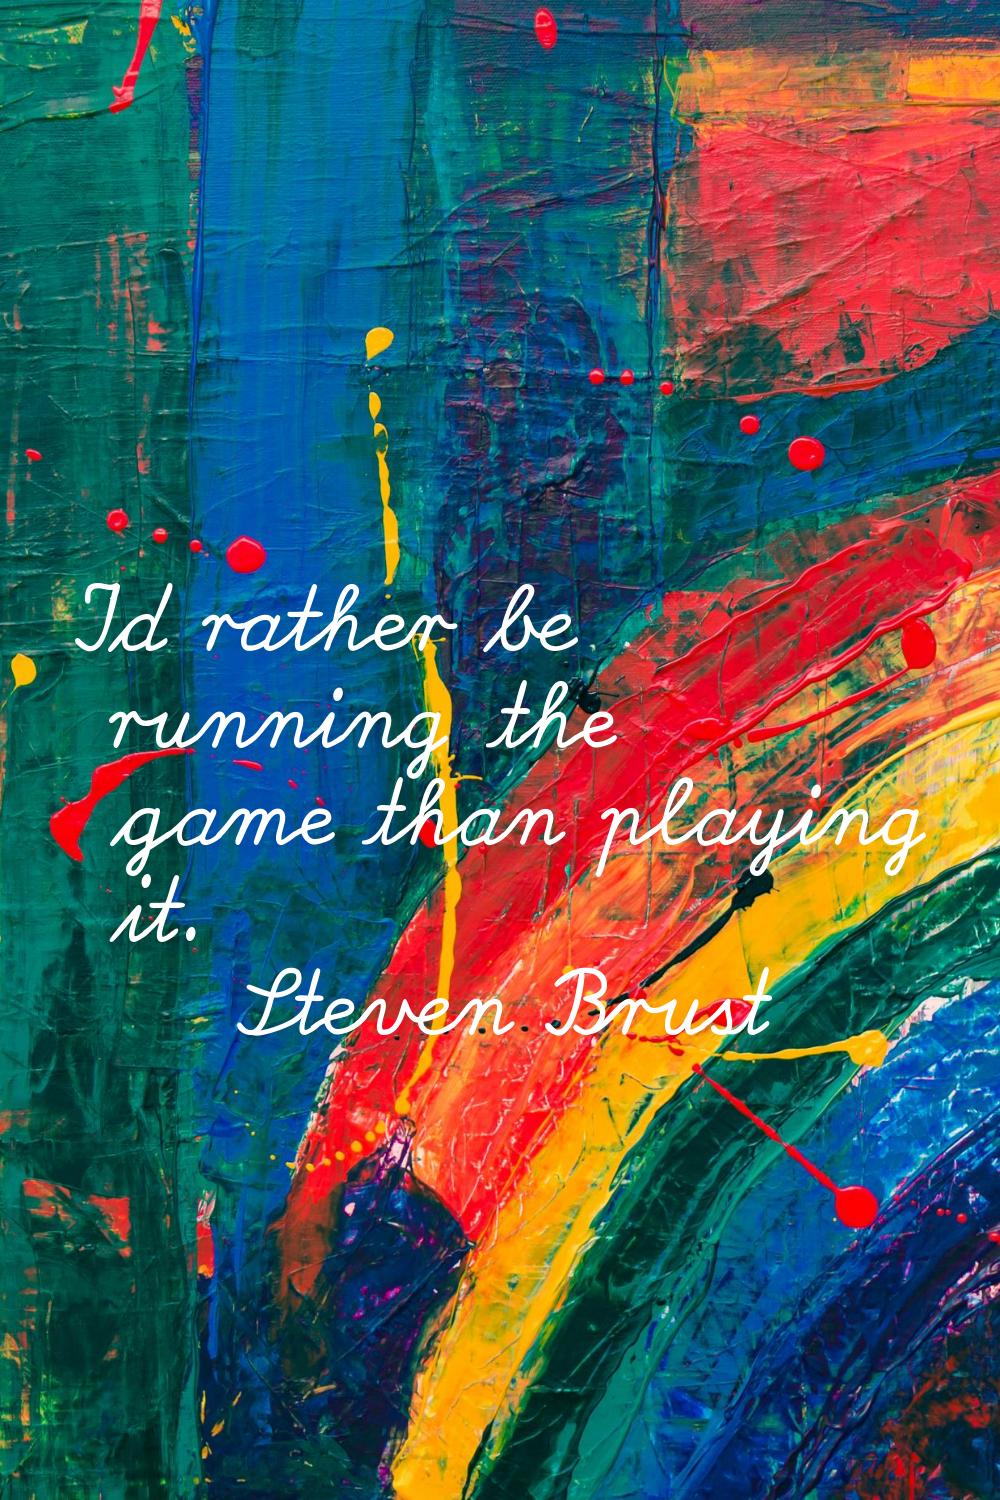 I'd rather be running the game than playing it.